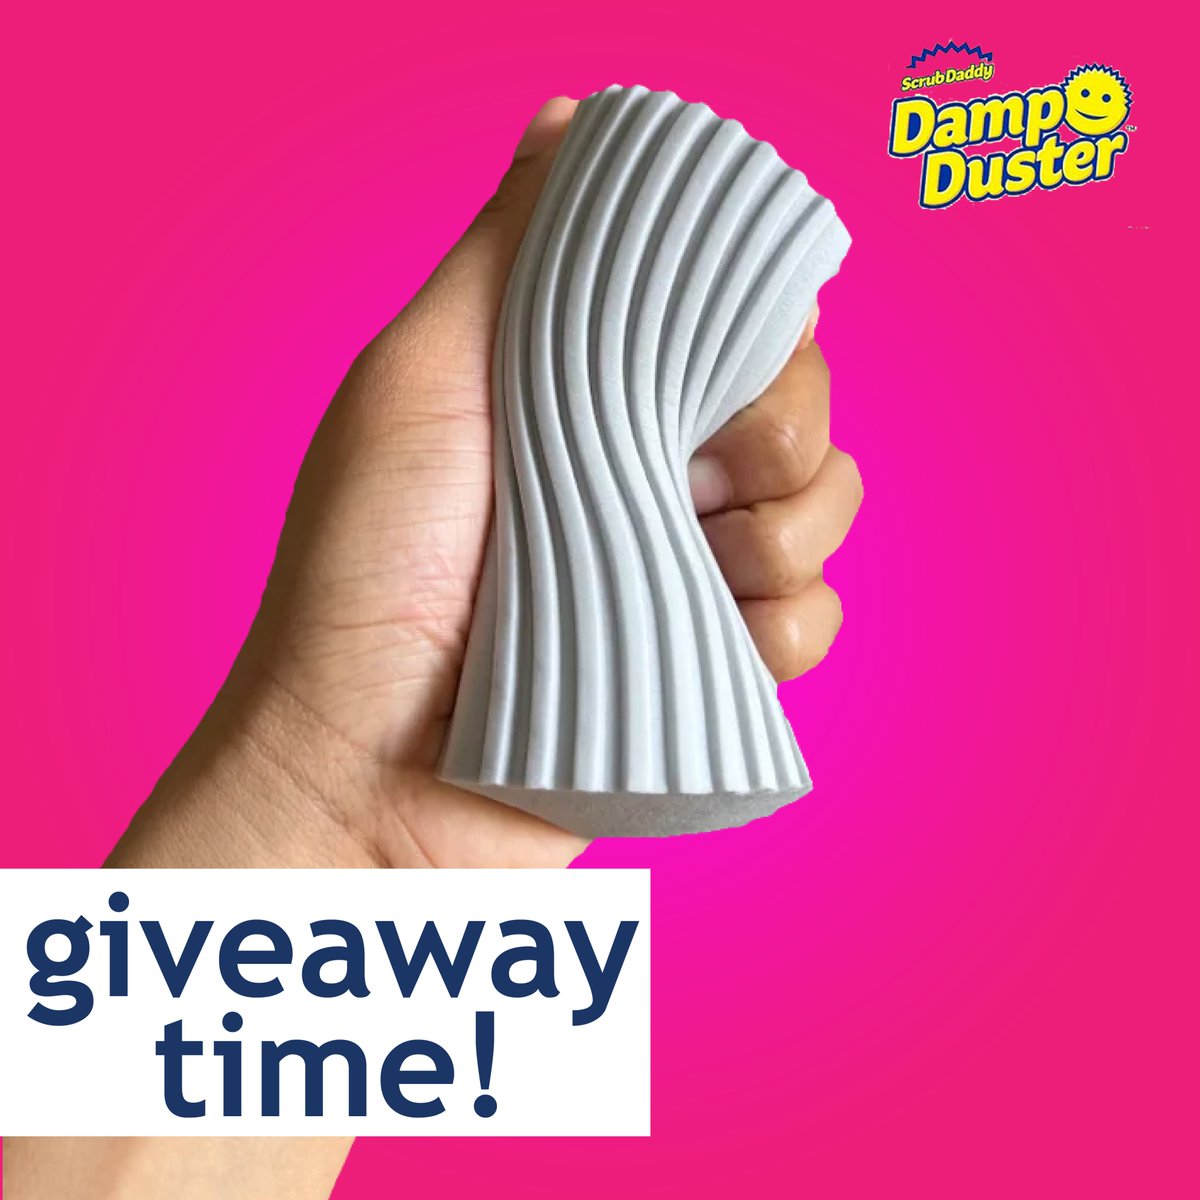 Have you seen the #DampDuster? We’re giving one away and all you need to do is like and share this post. 👍 Winners will be selected on Tuesday next week. Good Luck! #ScrubDaddy #giveaway #competition #comp #free #hype #superfan #win #cleaning #prize